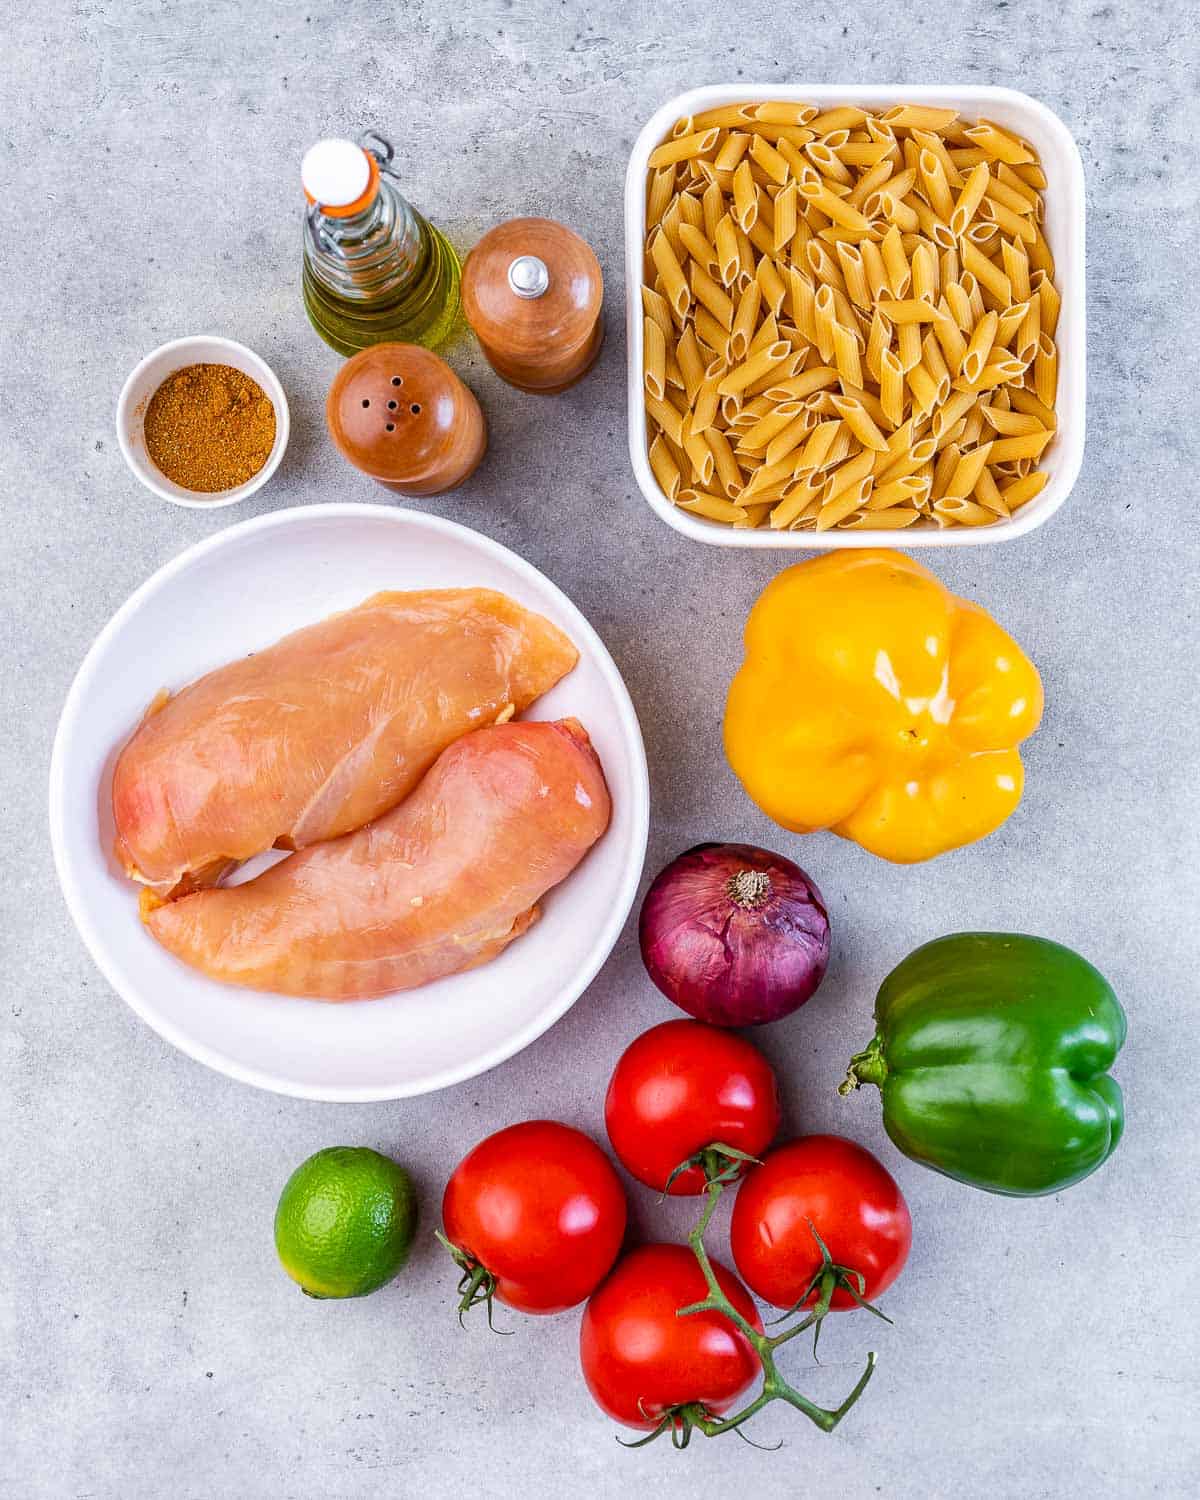 Raw chicken breasts on a plate near a bowl of pasta and tomatoes, a lime and bell peppers.